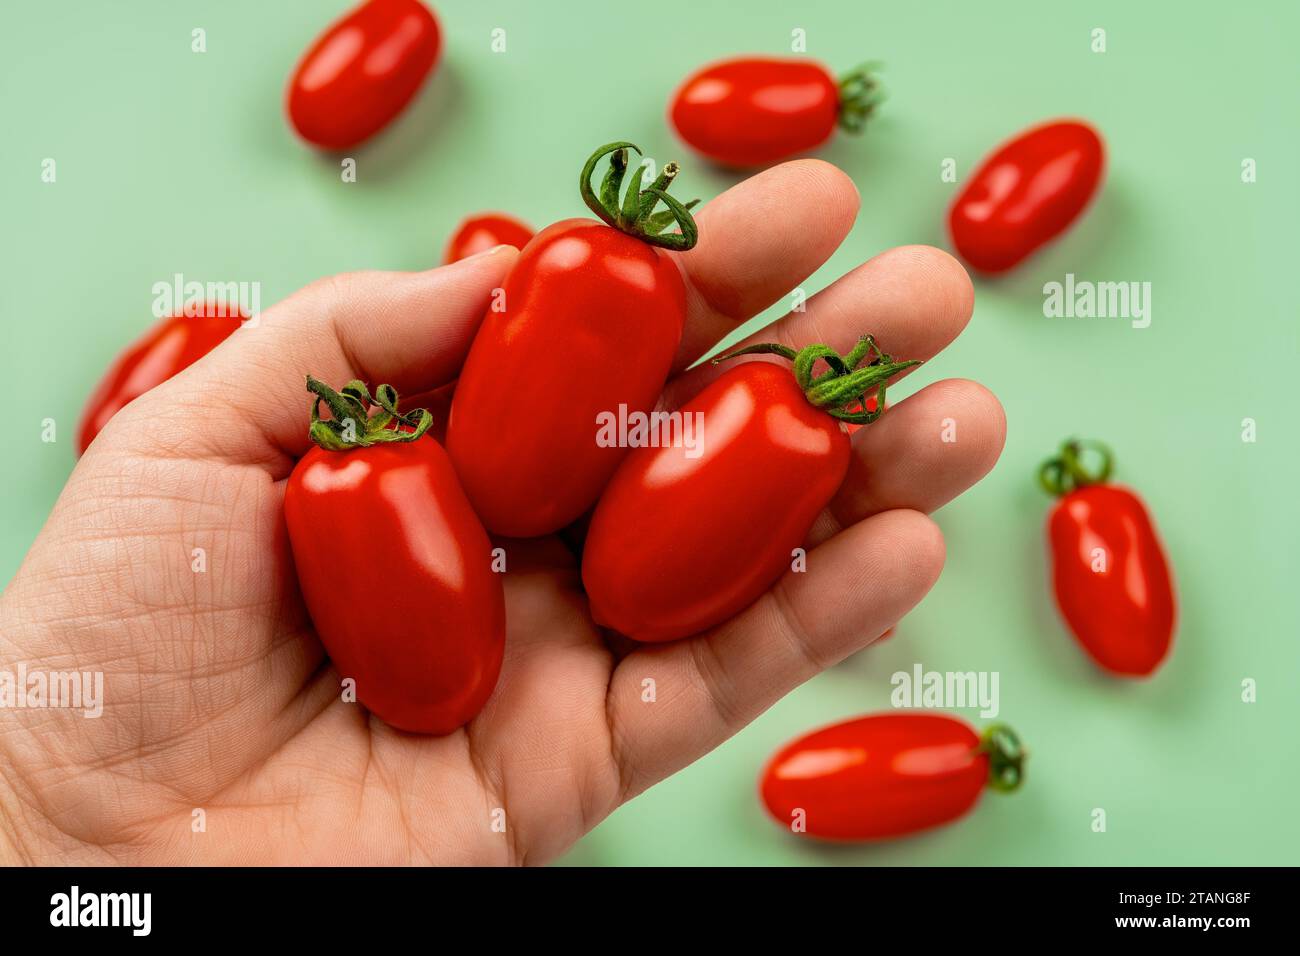 Raw Ornela cherry tomatoes on a woman handpalm over green background. Female hand holds three small bottle shaped tomatoes closeup. Organic vegetables Stock Photo